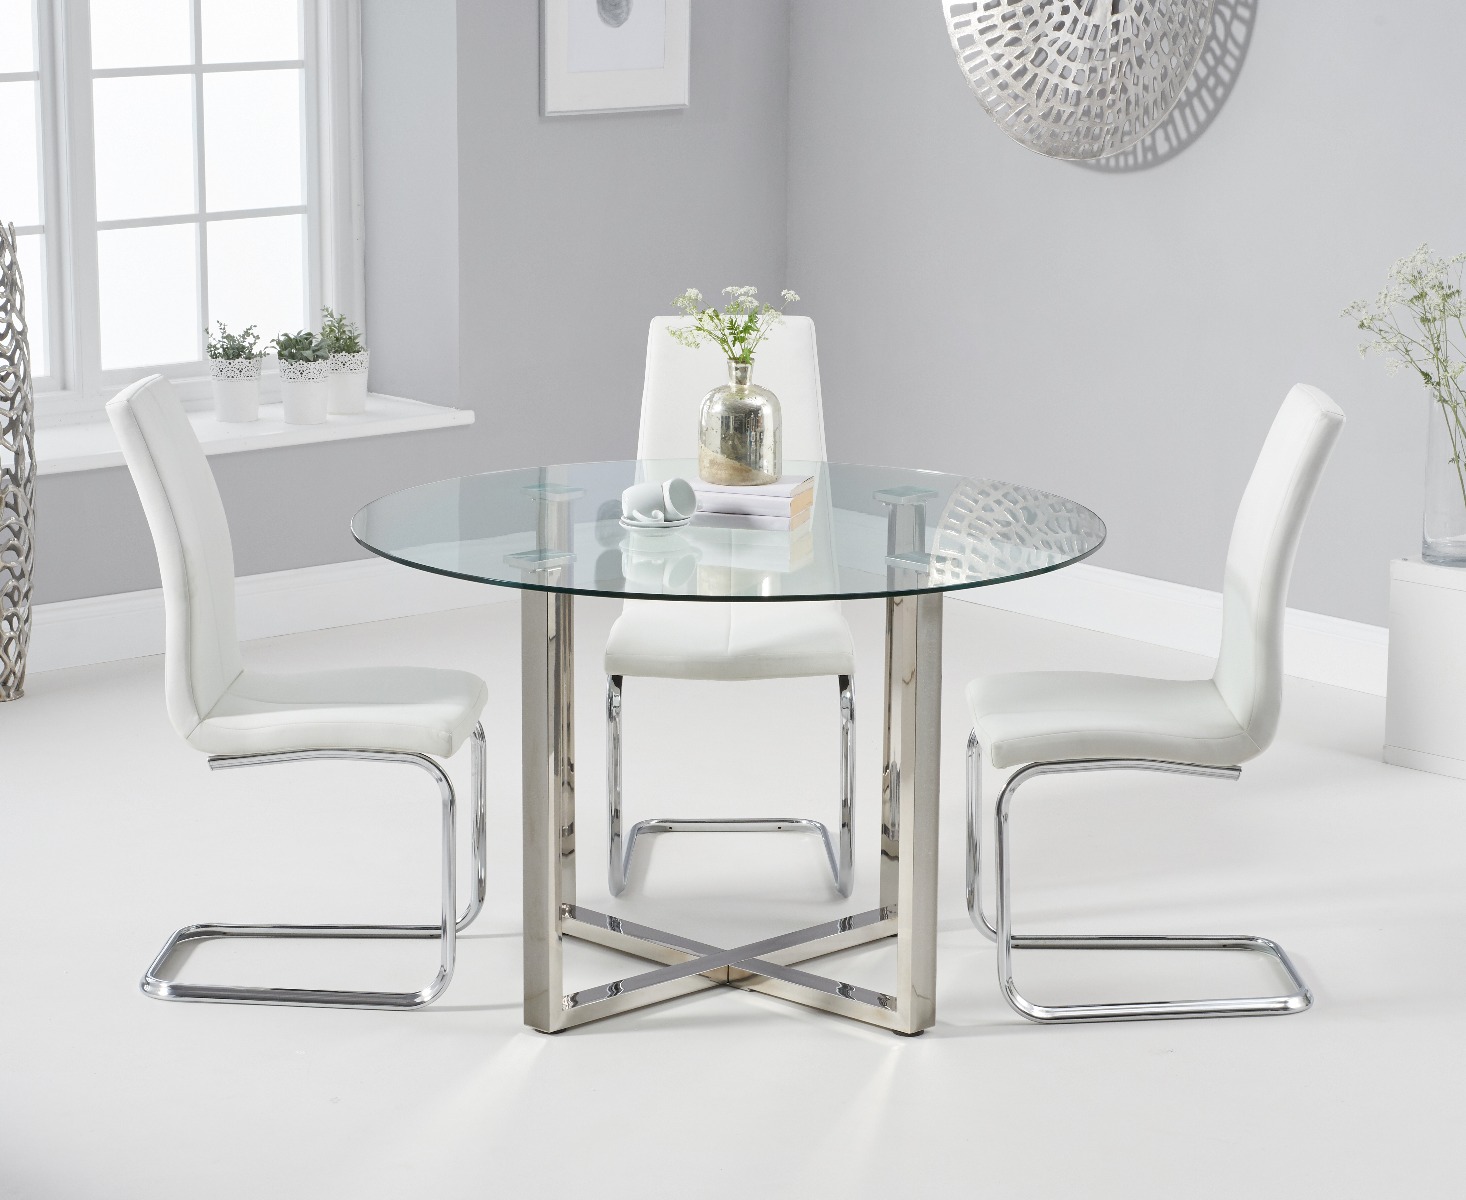 Photo 1 of Vaso 120cm round glass dining table with 4 grey gianni dining chairs